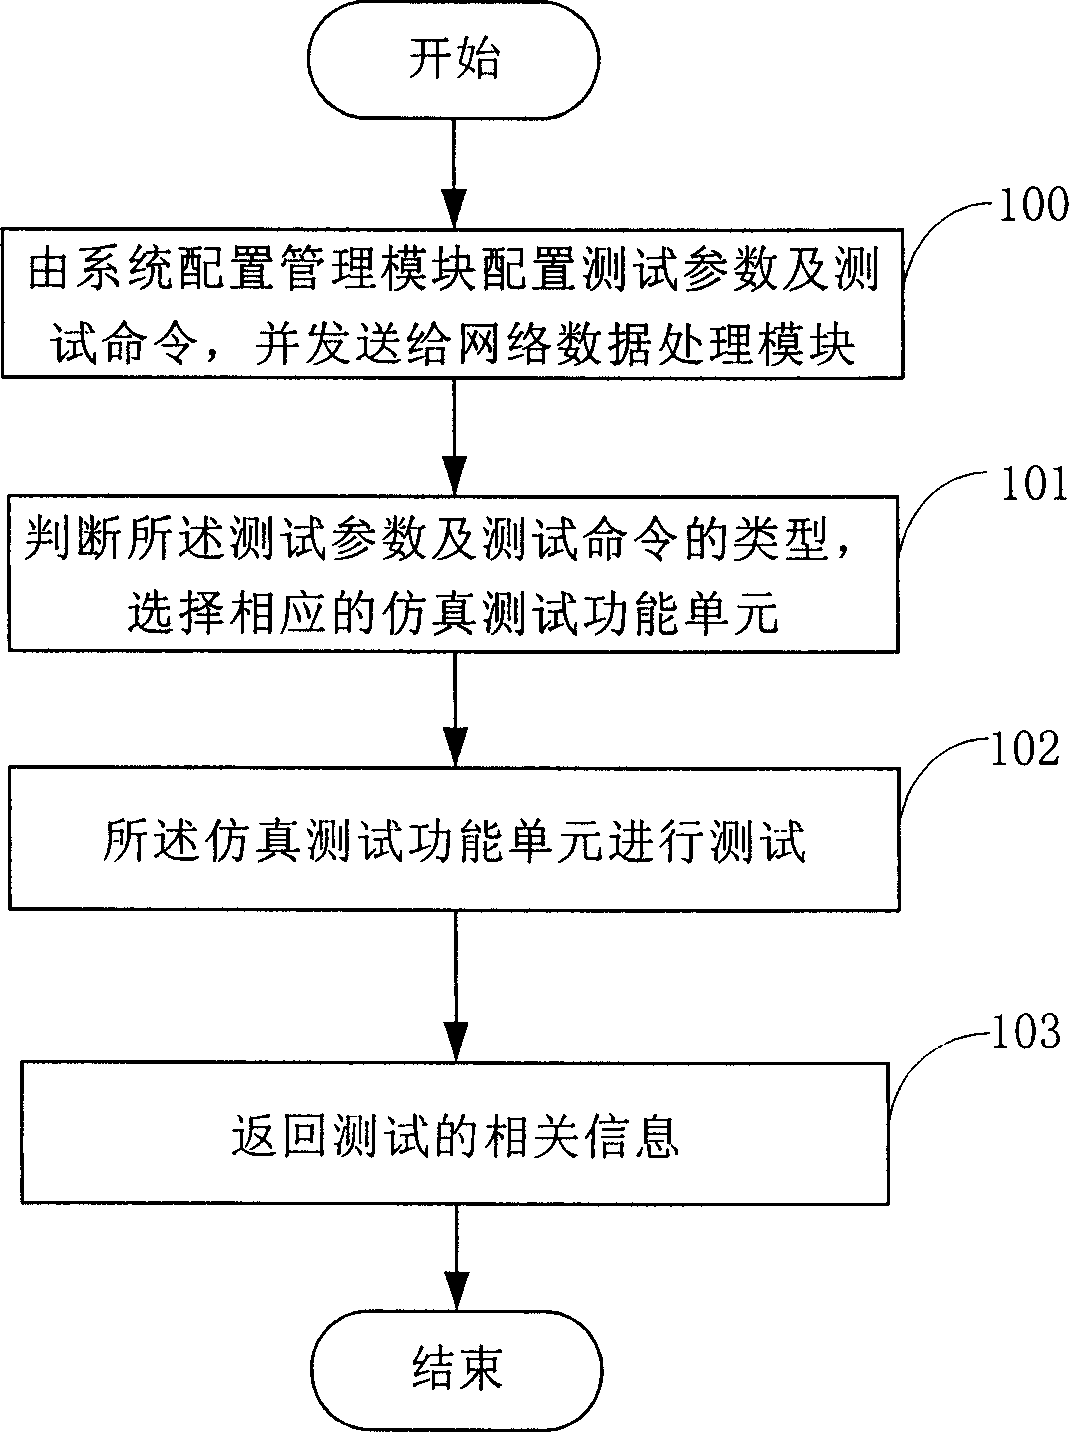 Network simulation detection system and method